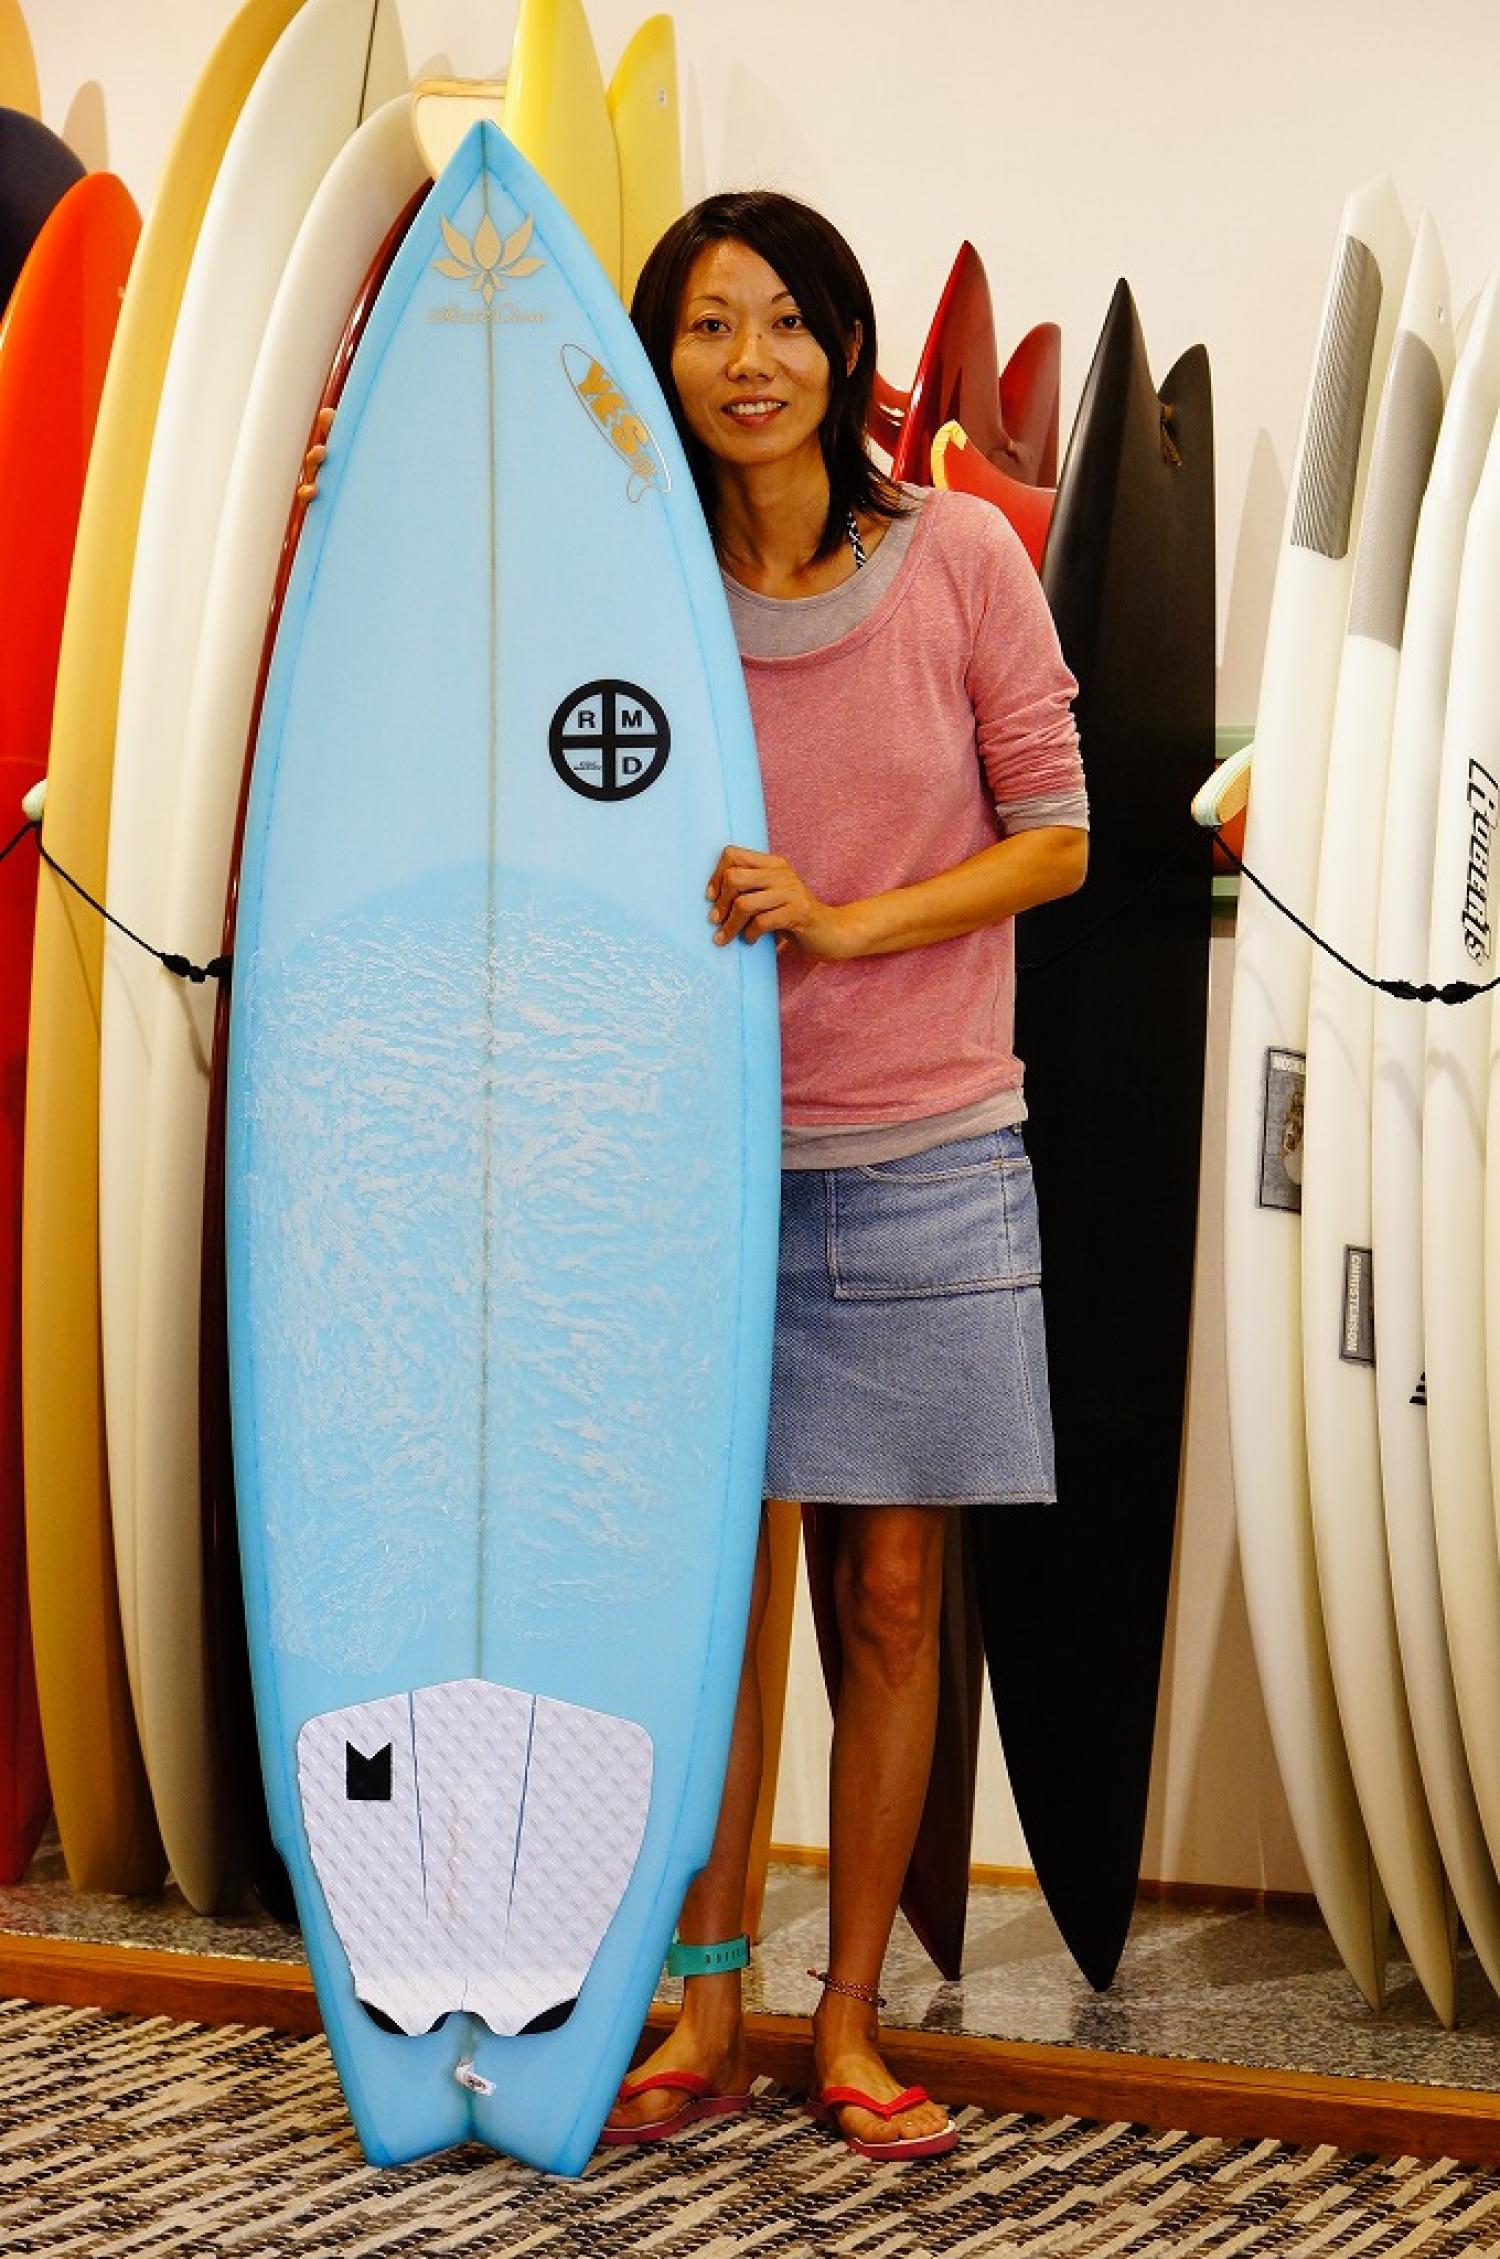 Todays YES SURFER RMD SURFBOARDS